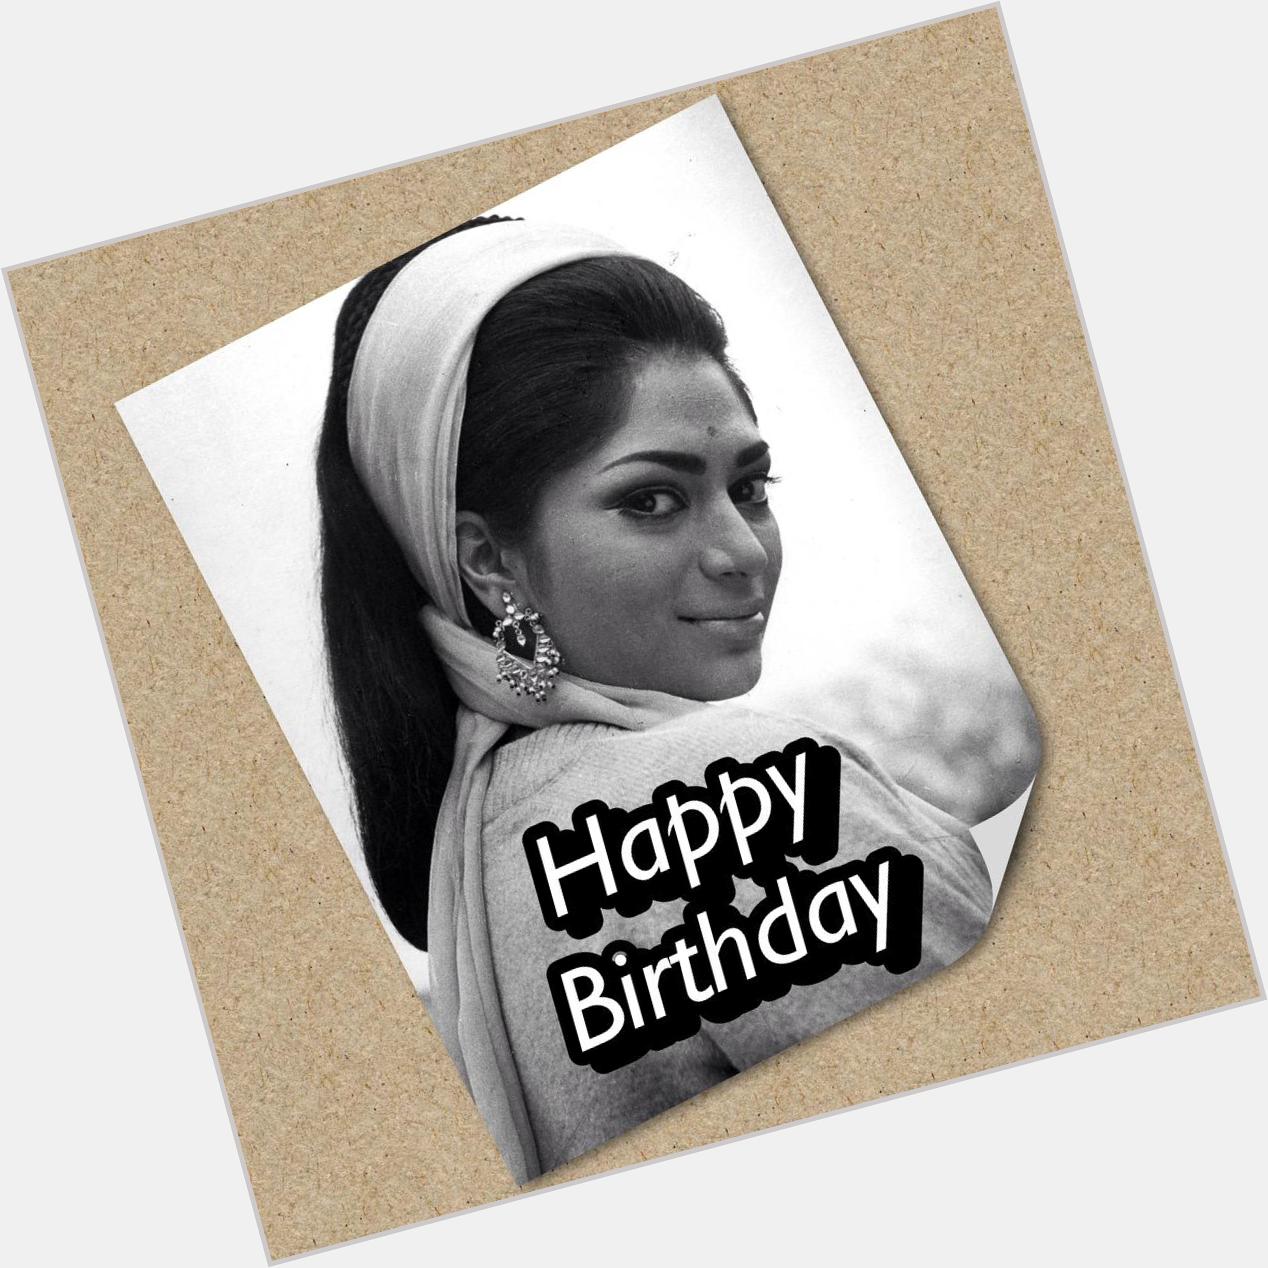 Dear Simi Ji ,Happy Birthday to you, lots of love & best wishes , have a wonderful  one . We love you 